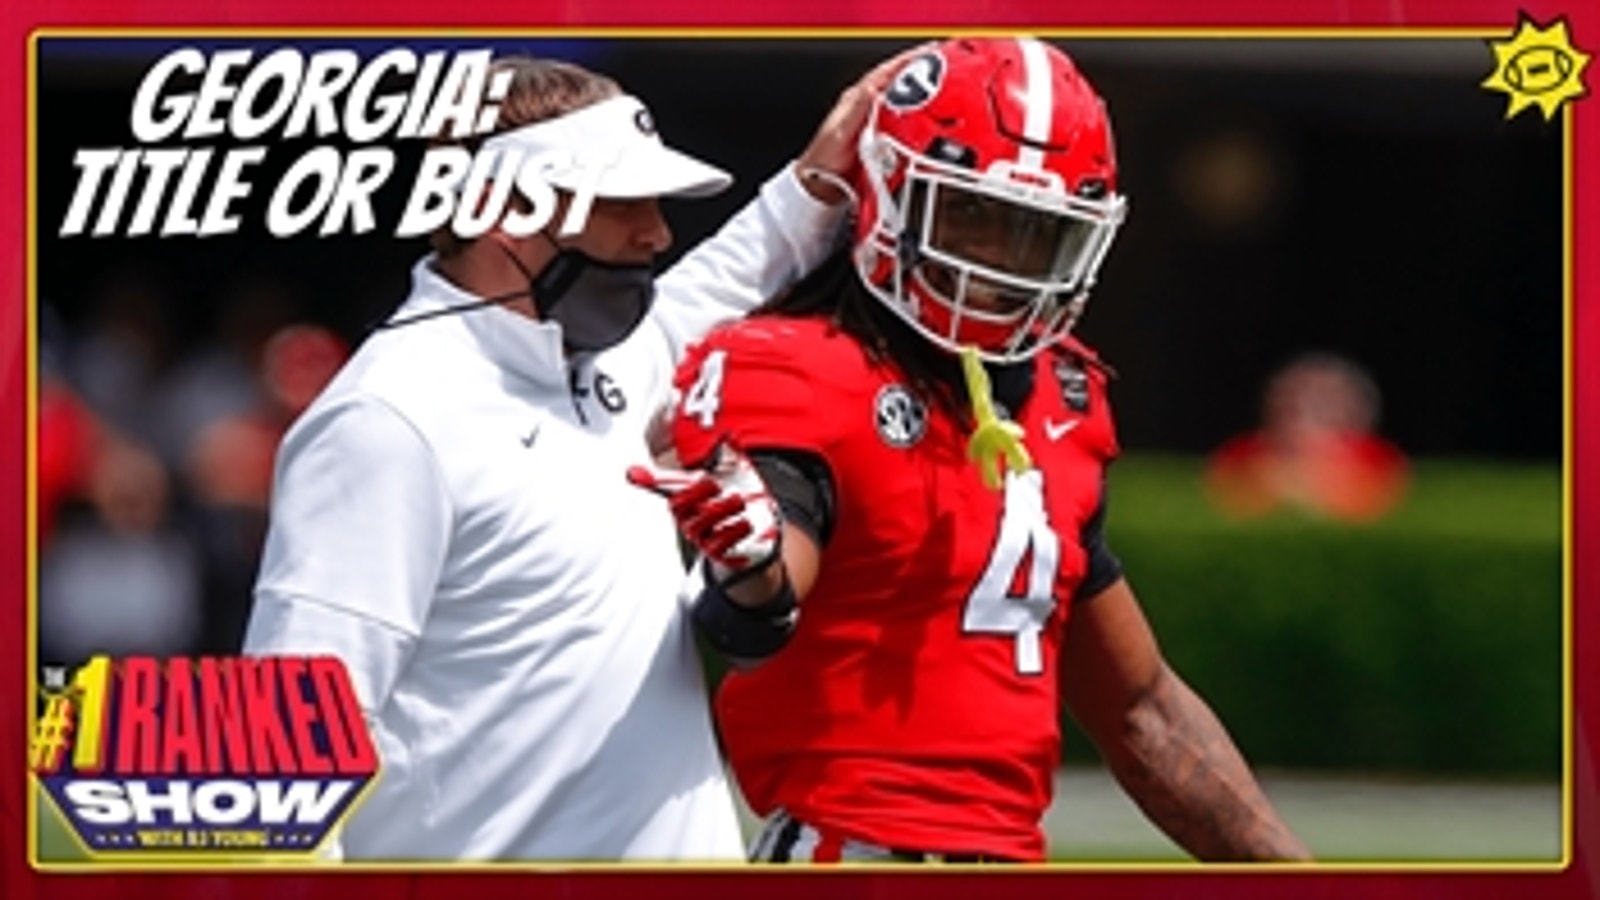 Georgia is in title-or-bust mode in the 2021 season | No. 1 Ranked Show